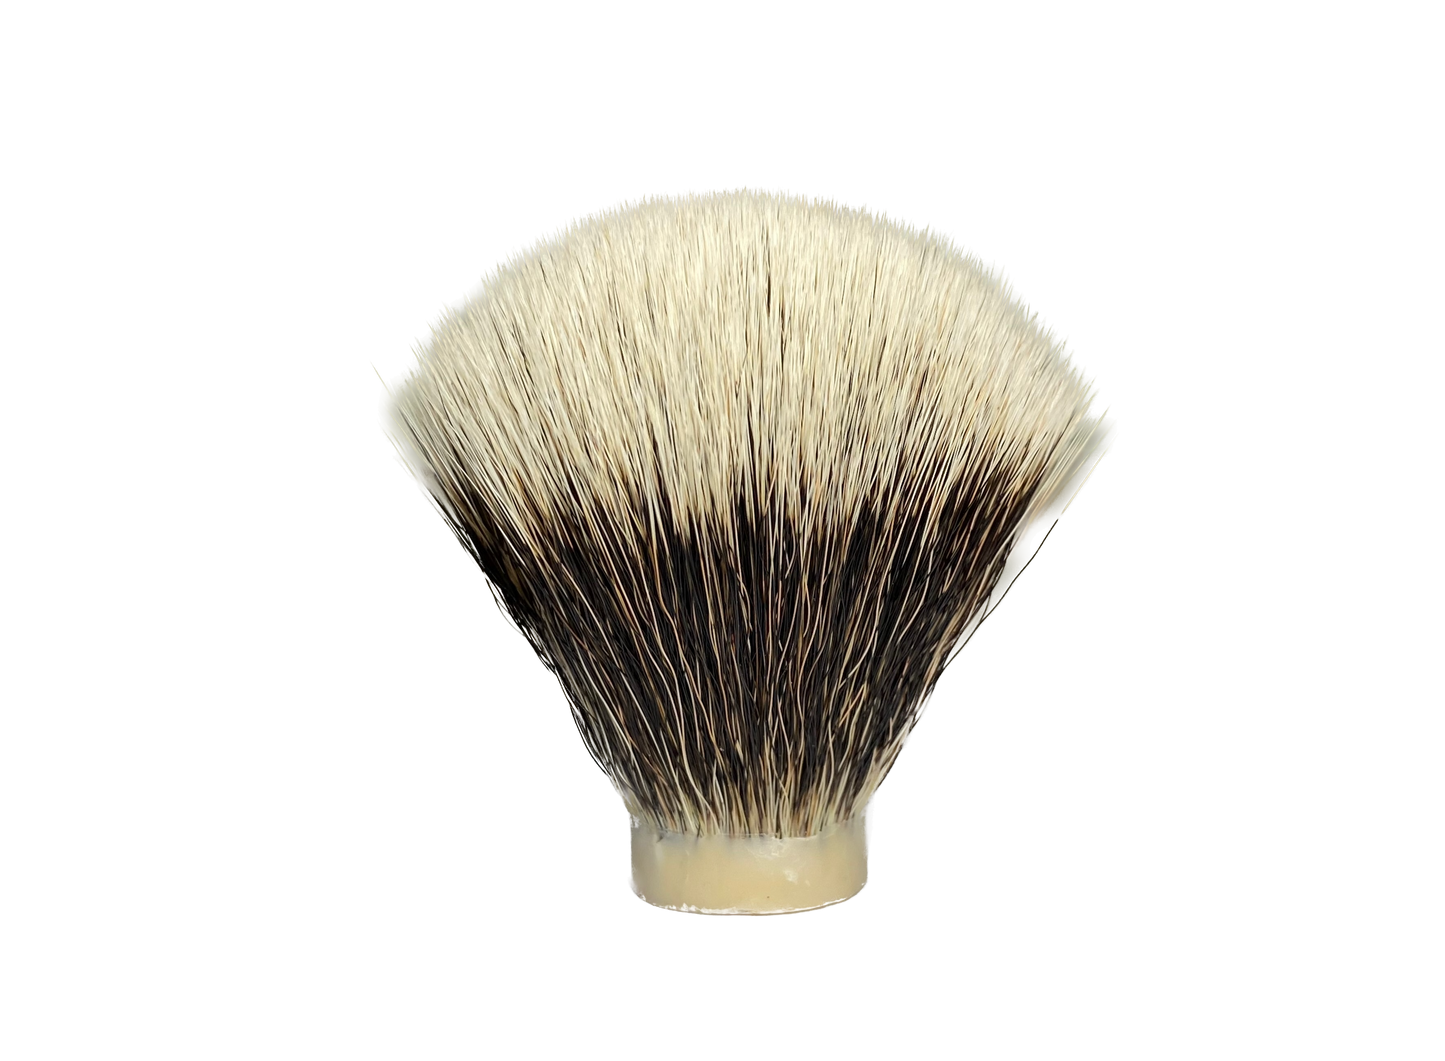 The HCX / S17 Synthetic Shave Brush Knot